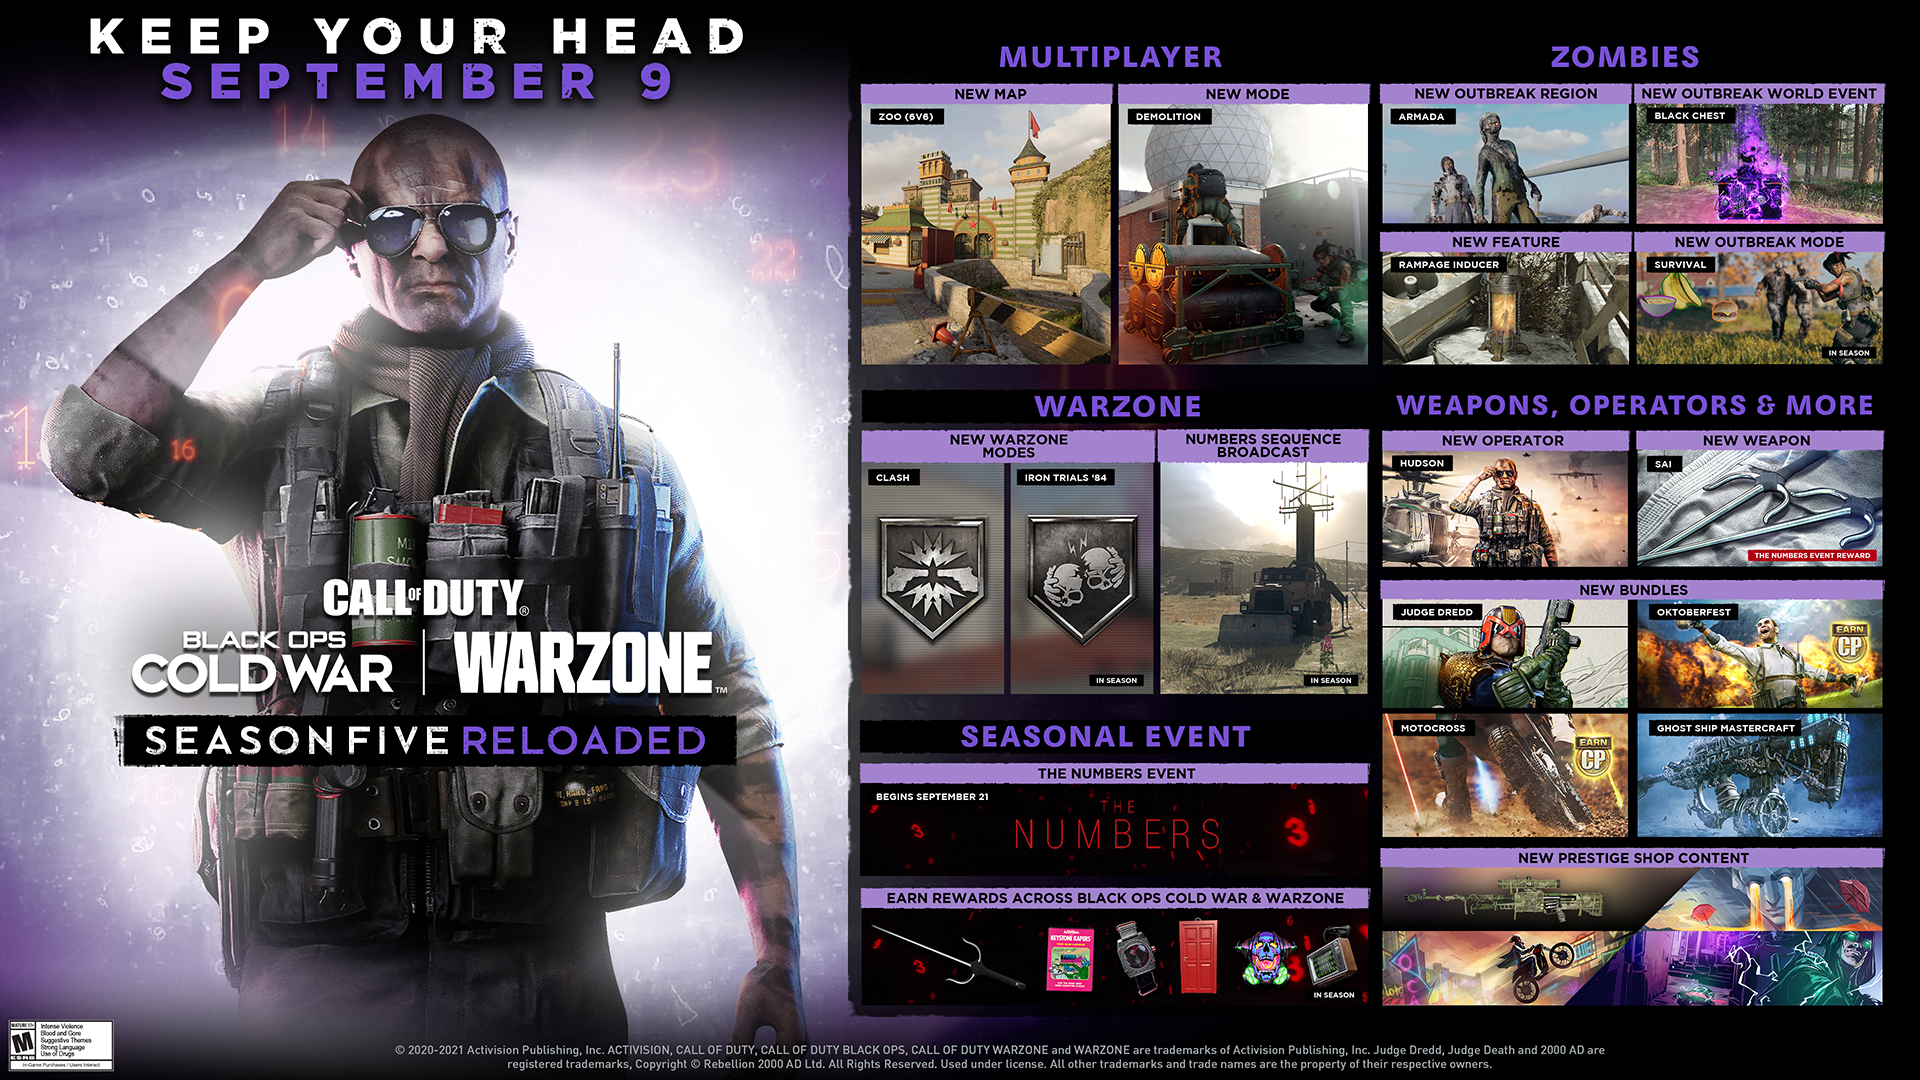 Introducing Call of Duty®: Black Ops Cold War, Warzone™, and